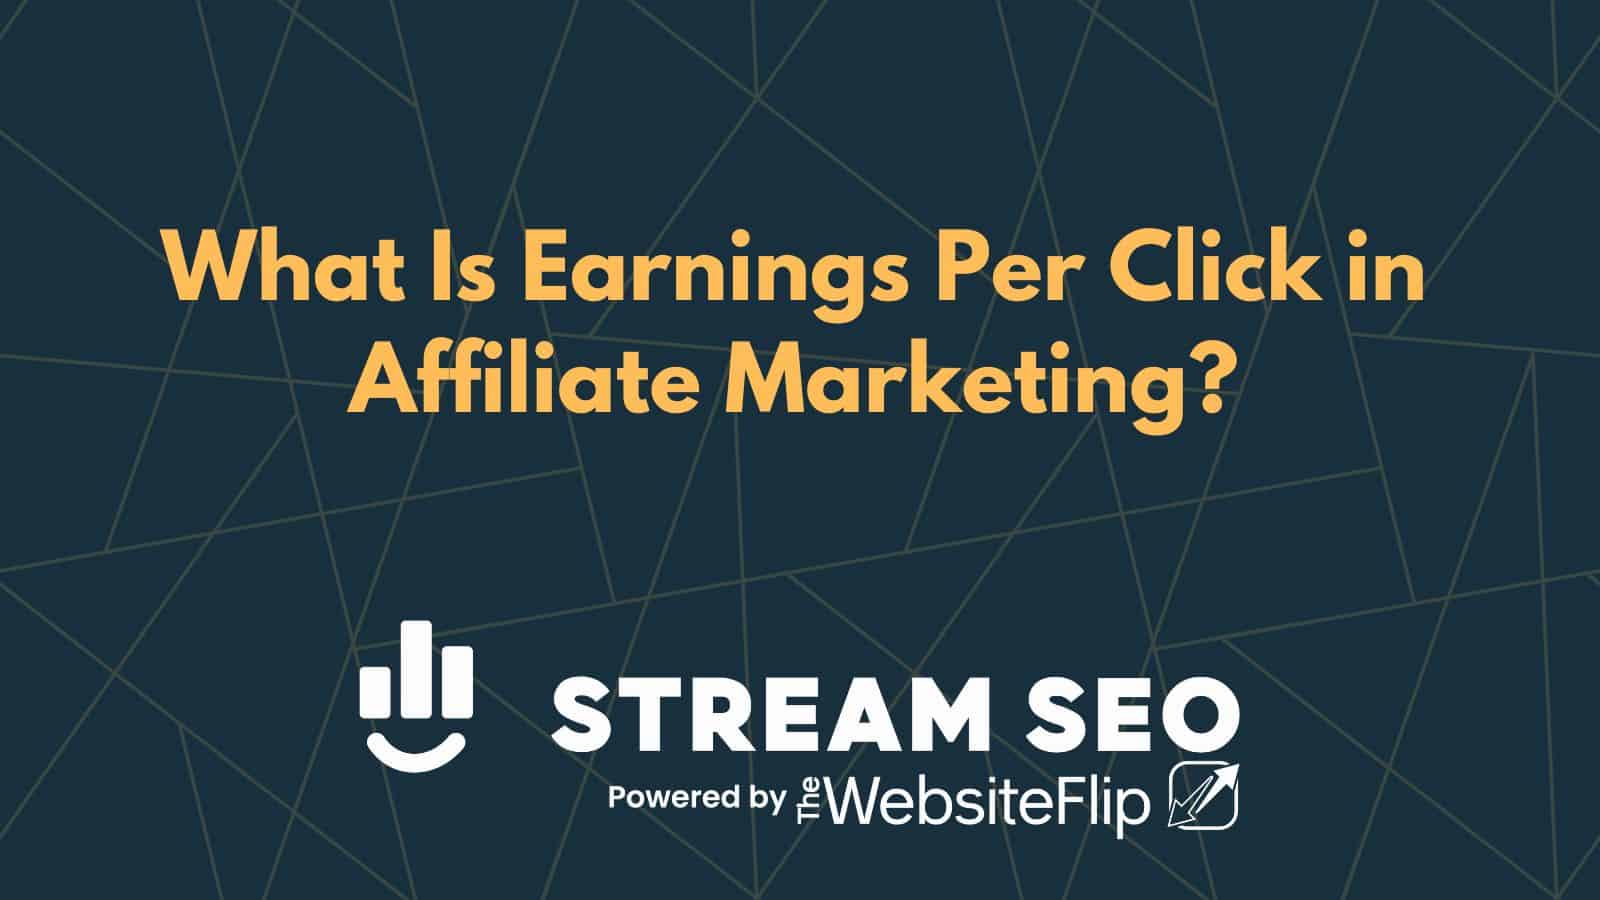 What Is Earnings Per Click in Affiliate Marketing?